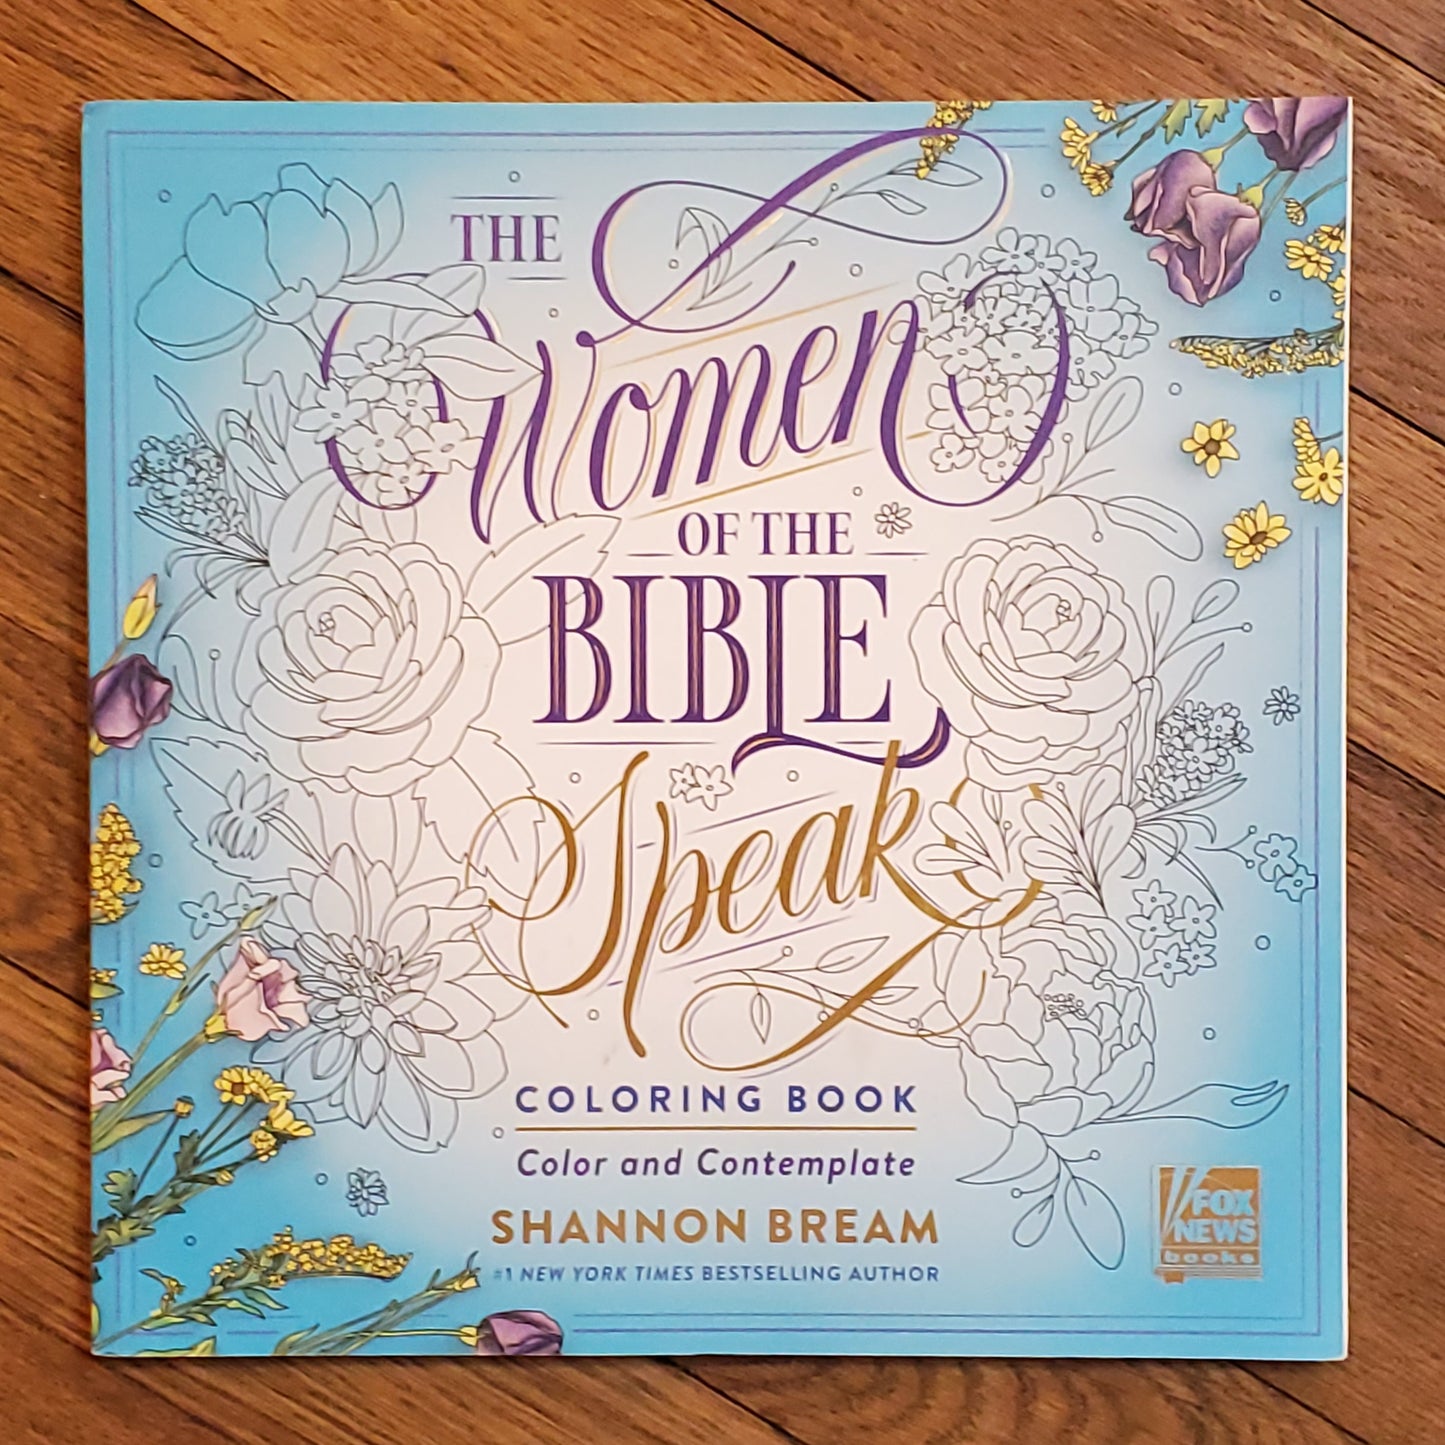 Coloring Book - The Women of the Bible Speak